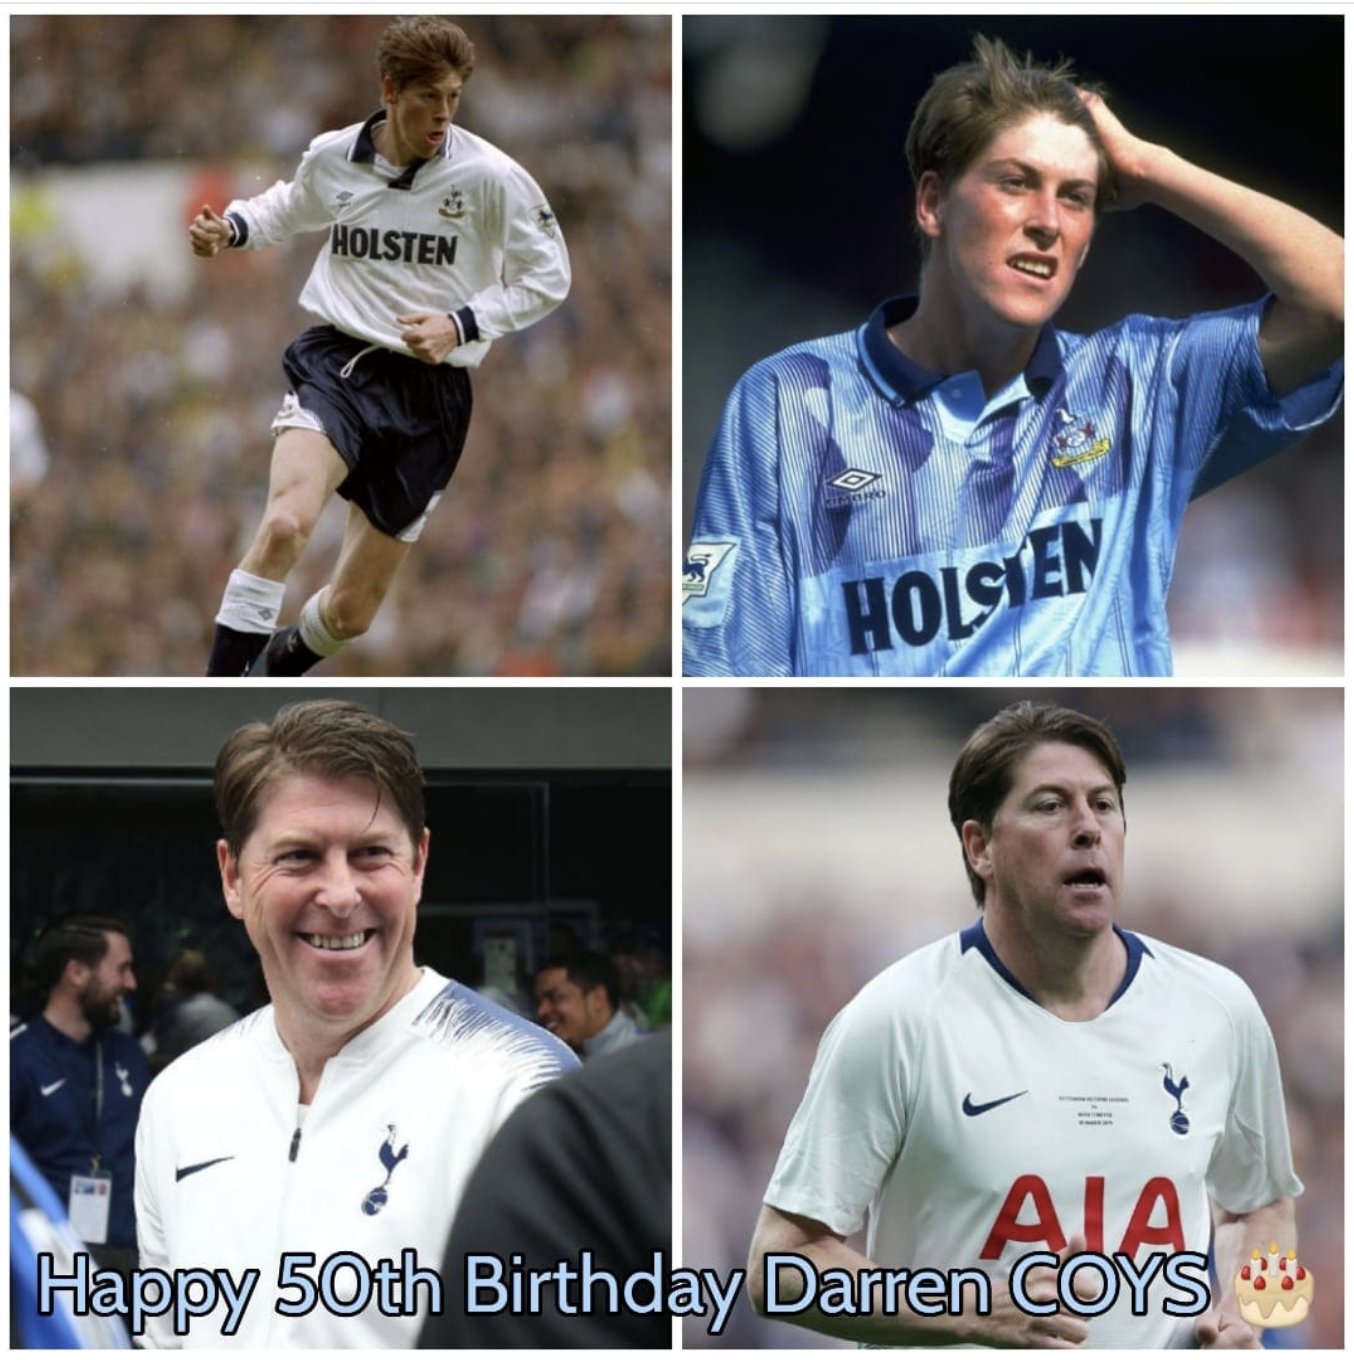 Happy 50th Birthday to Darren Anderton. Have a great day! 